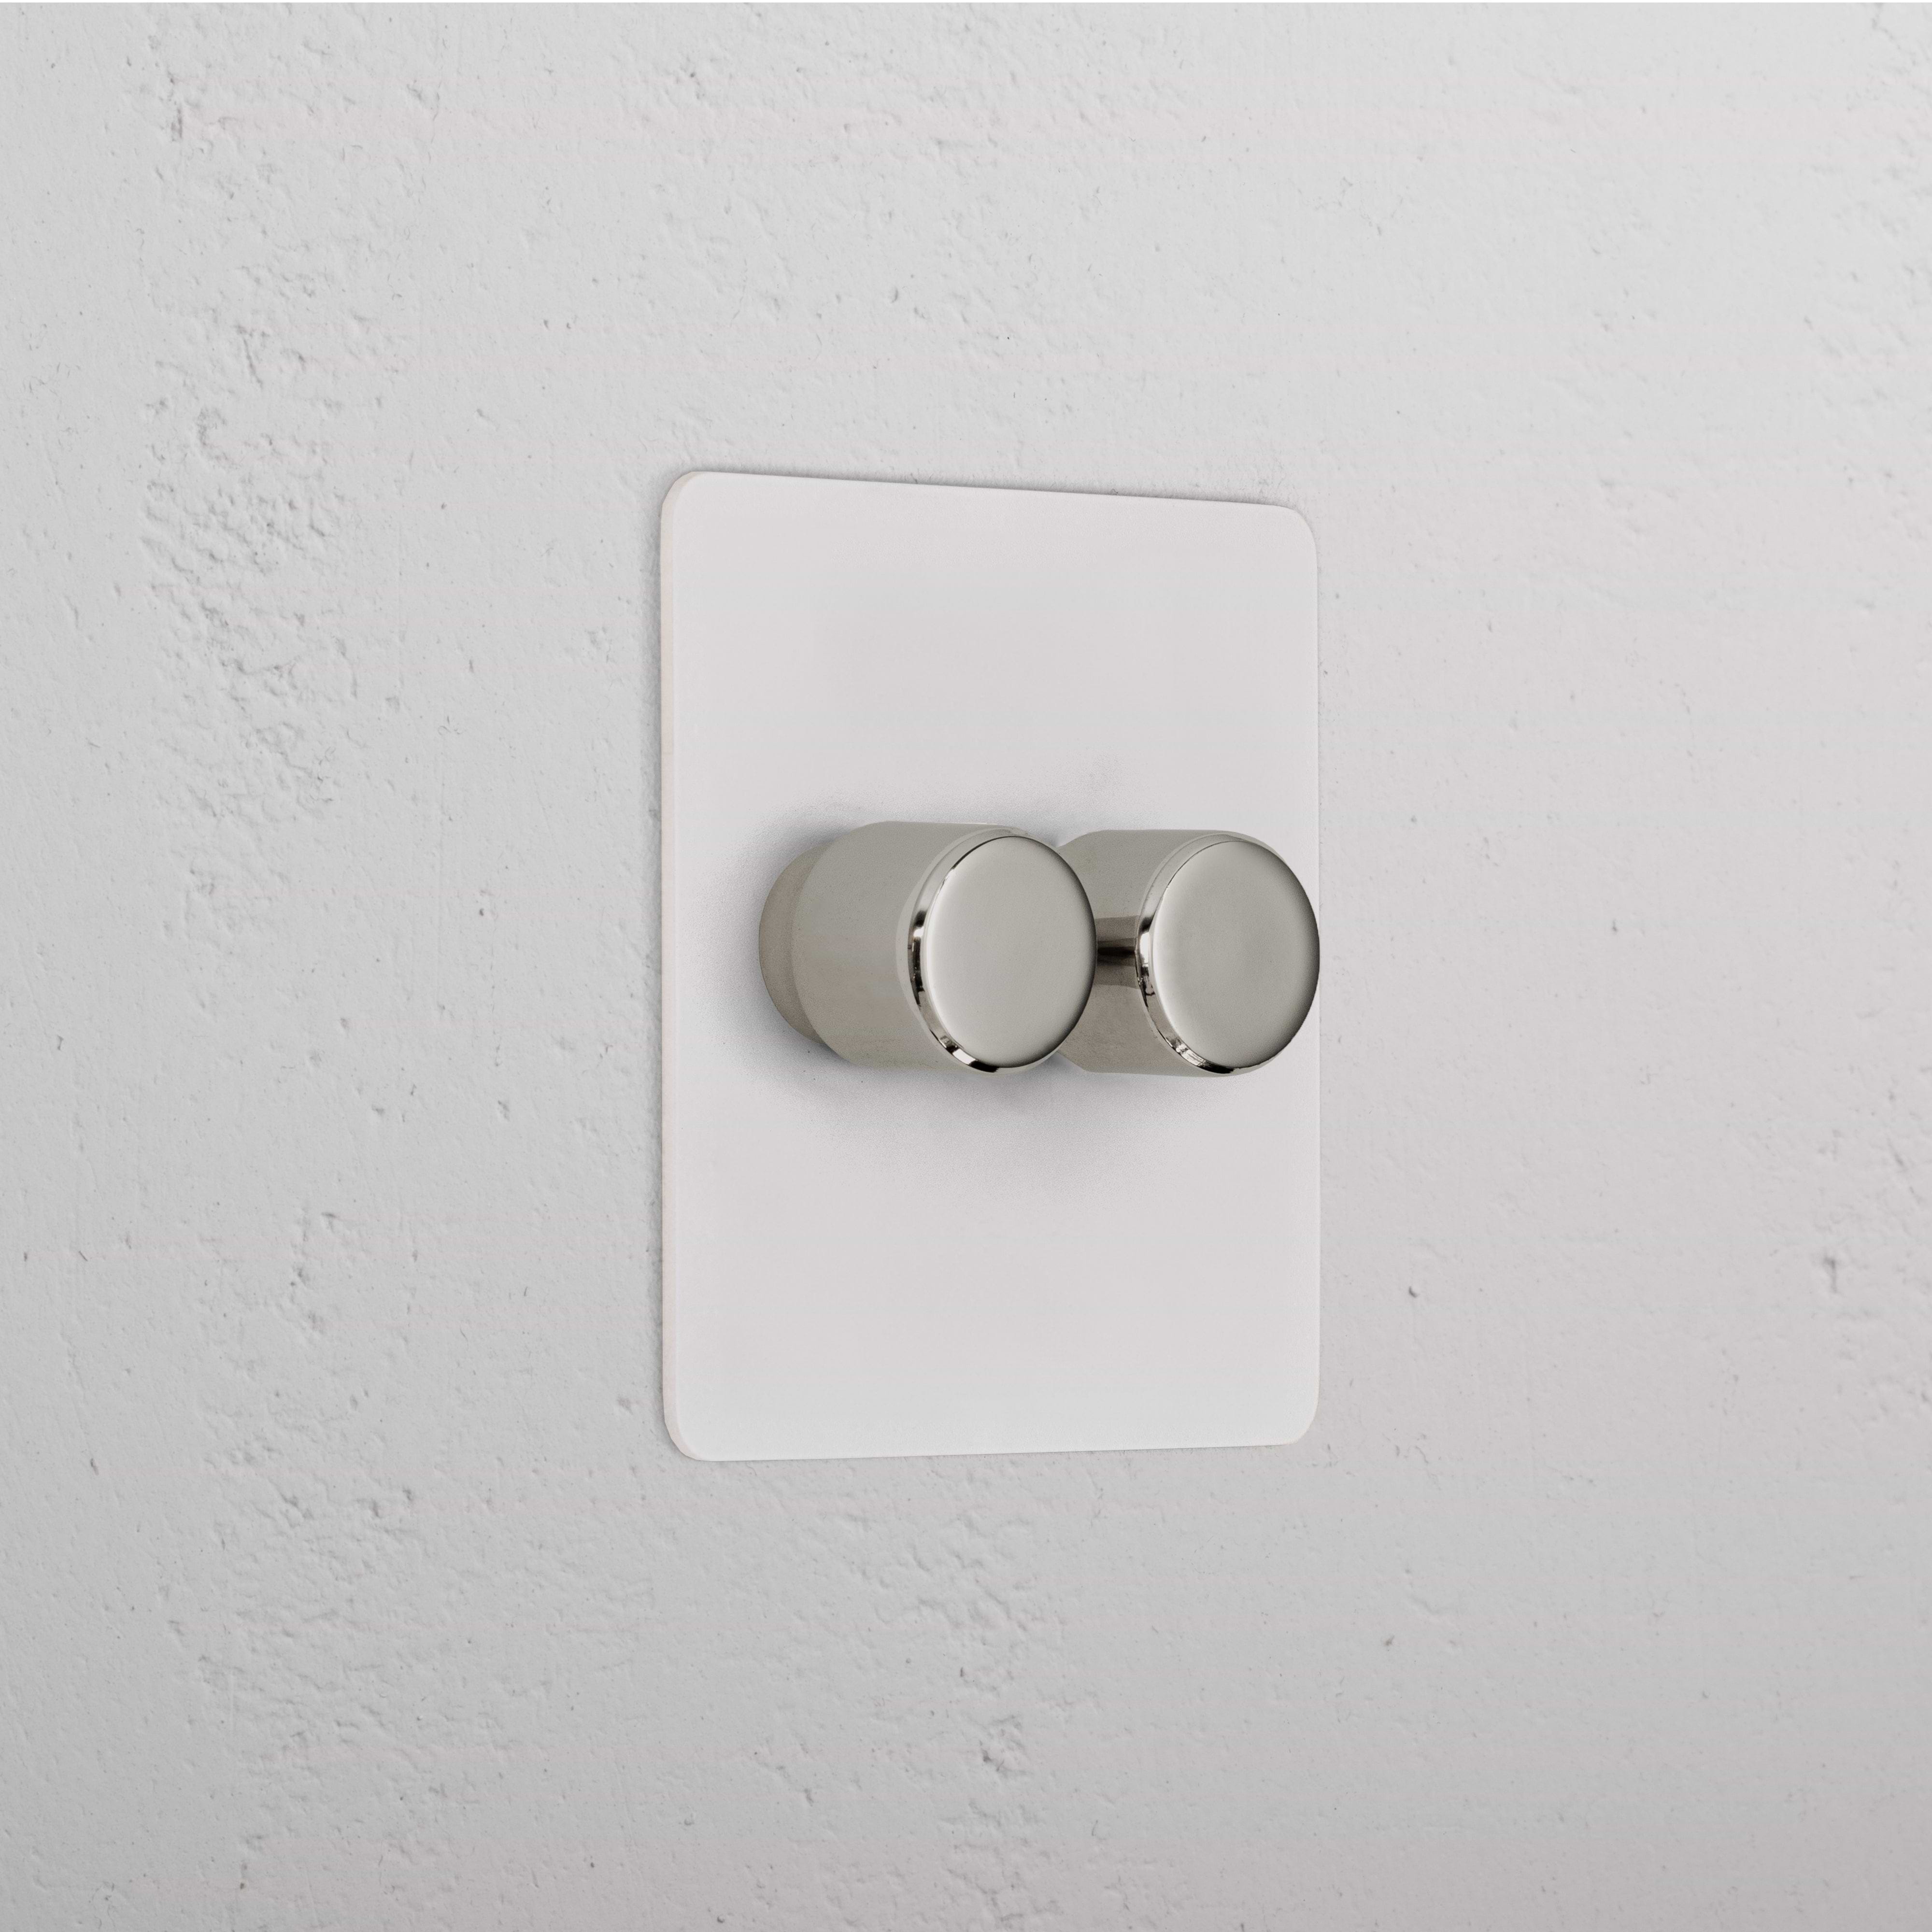 2G Dimmer Slimline Switch - Paintable Polished Nickel